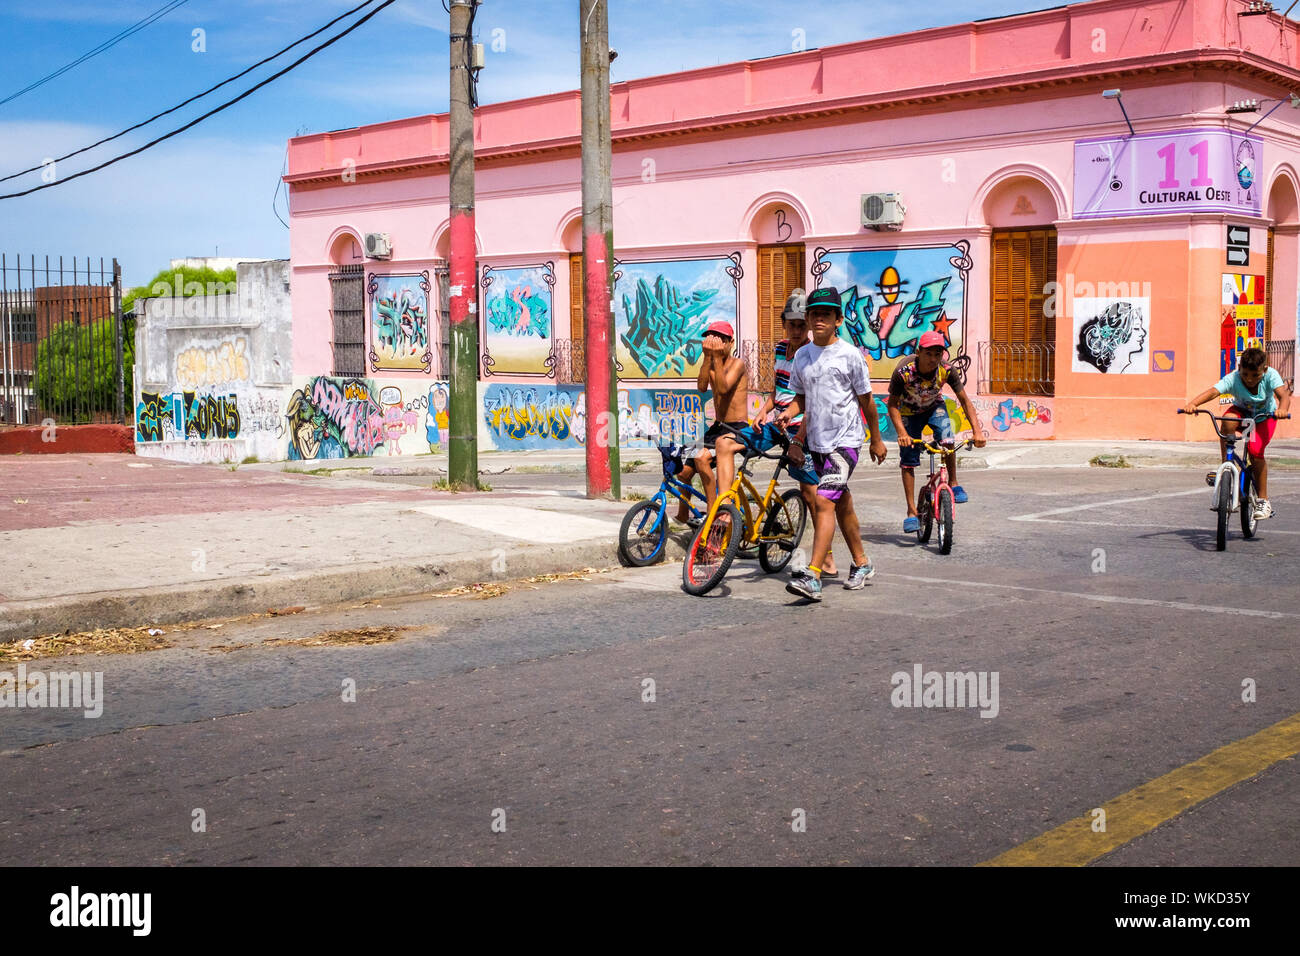 Uruguay, Montevideo: In the Cerro District, young boys with bikes playing in front of the cultural centre, with colourful graffiti on the facades Stock Photo